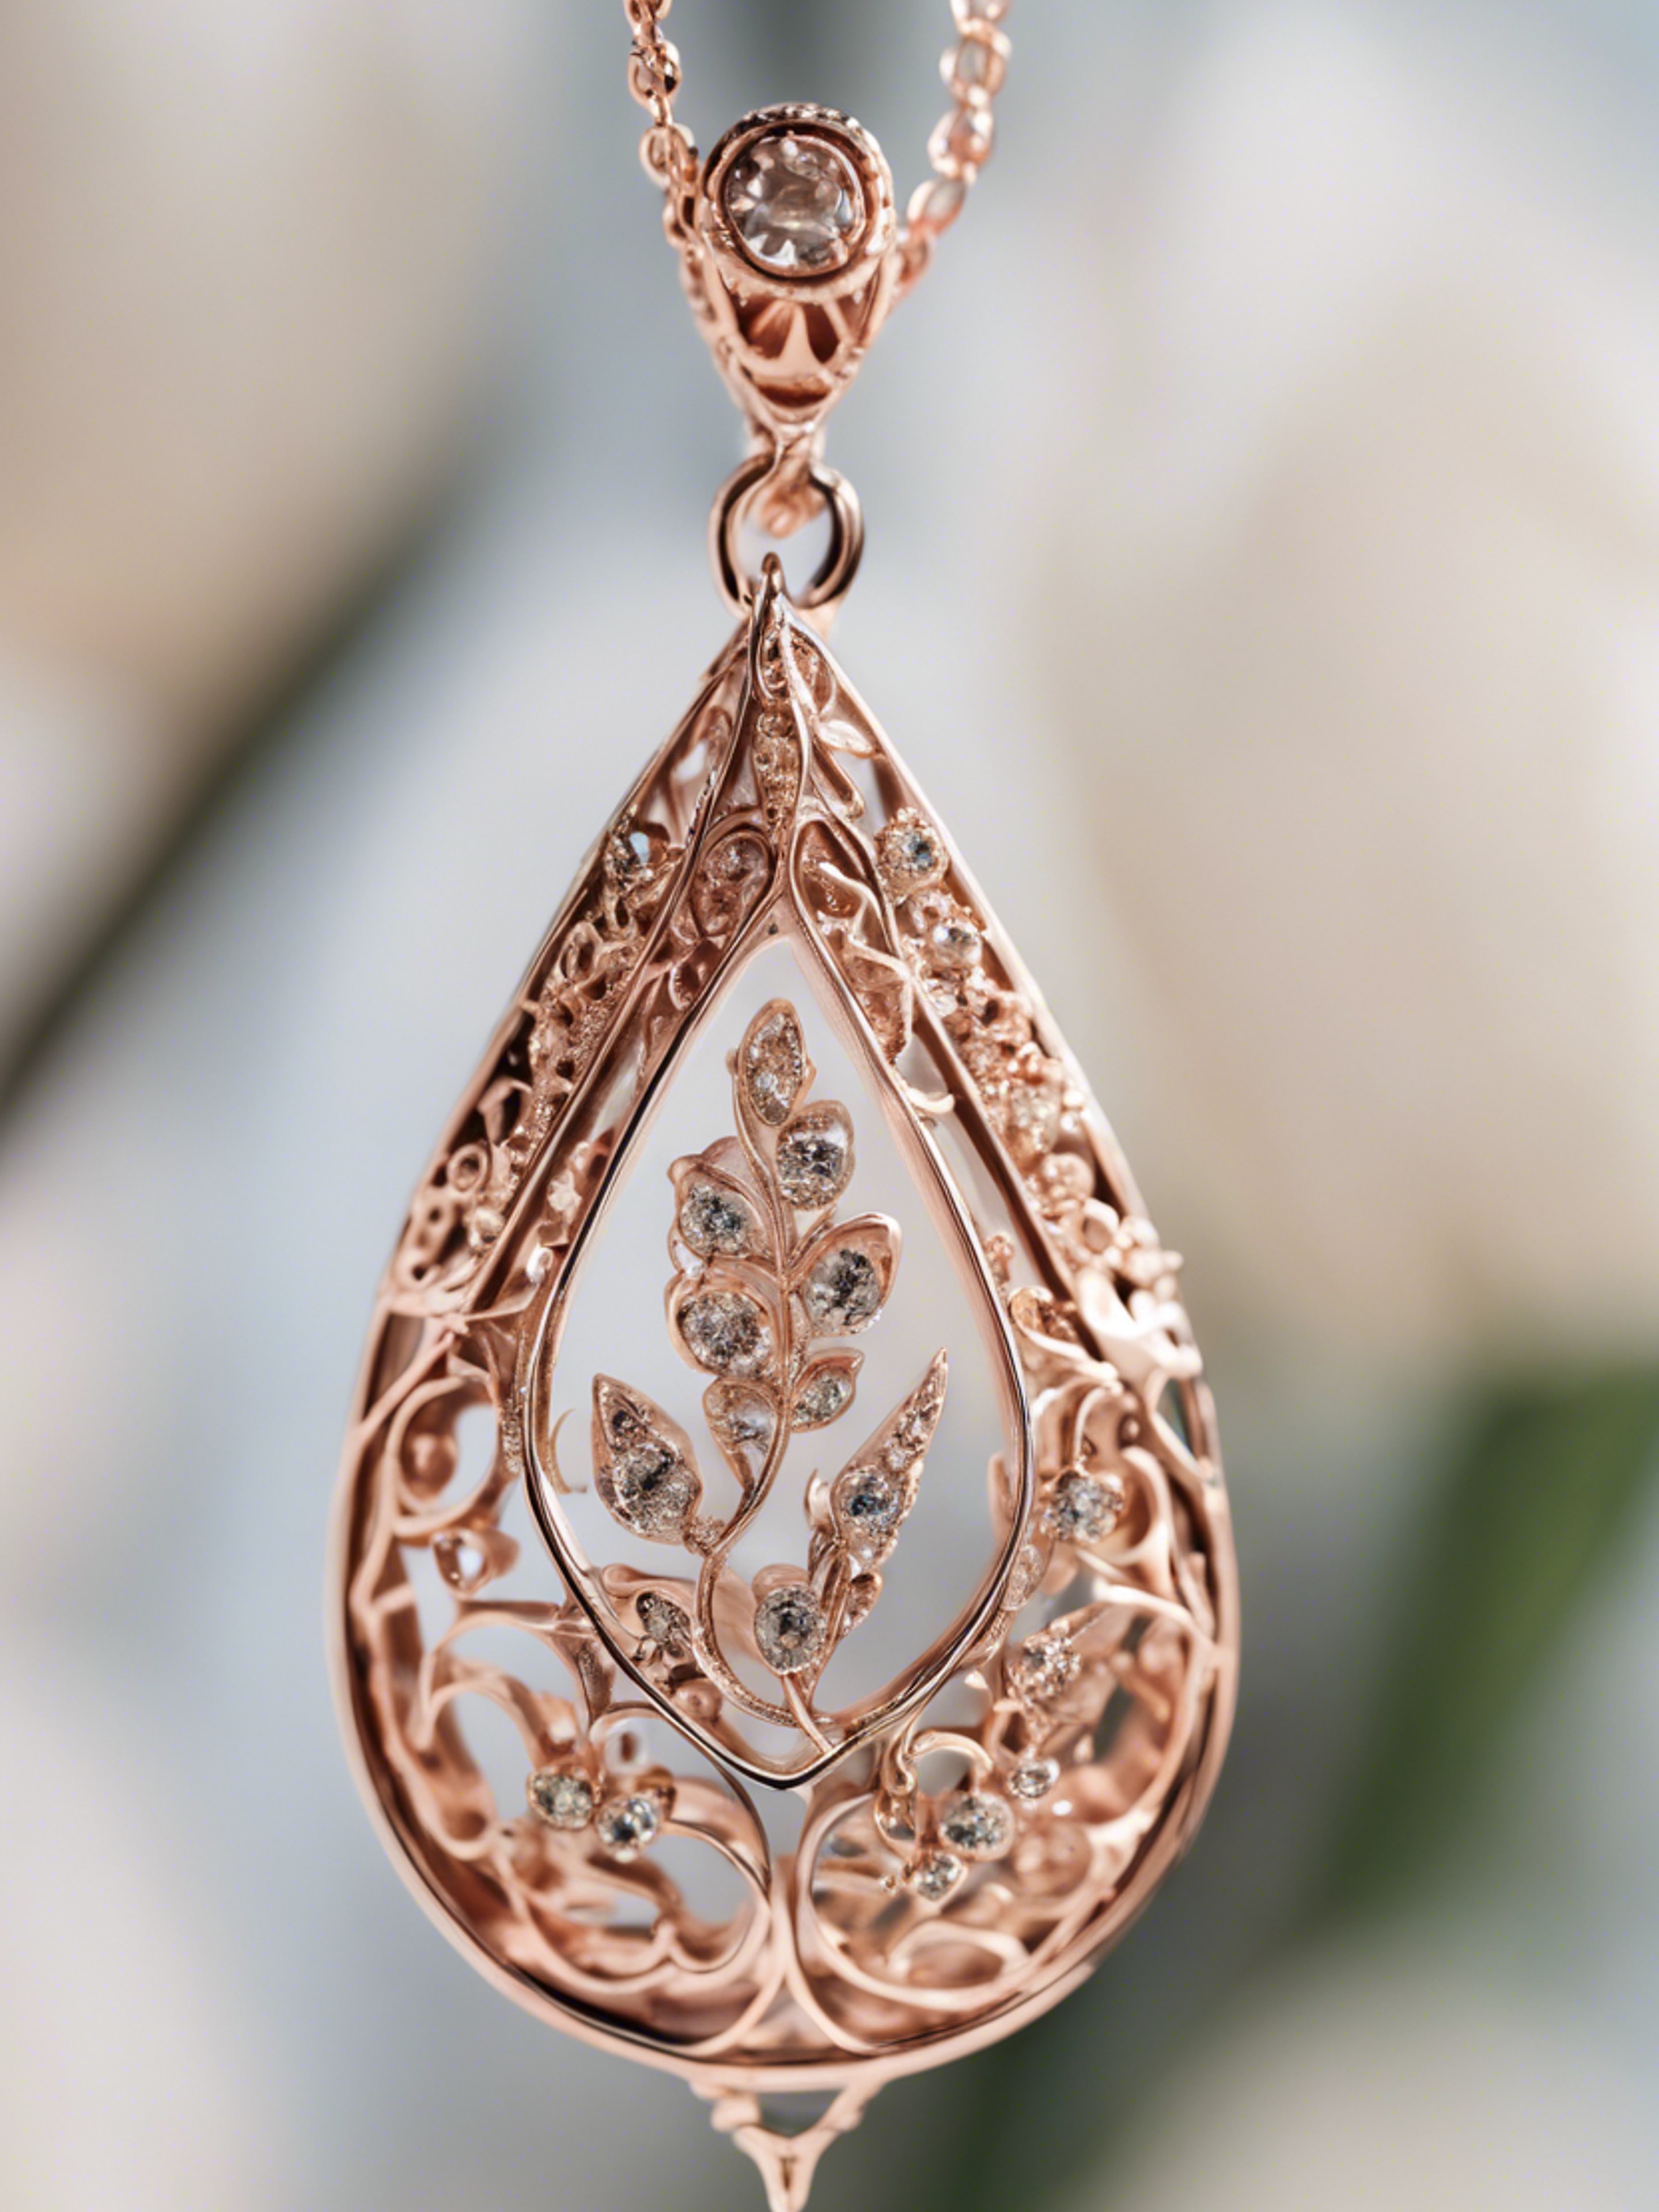 A close-up of a rose gold teardrop-shaped pendant with an intricate, floral design. Kertas dinding[94a65aa8484349f1bf09]